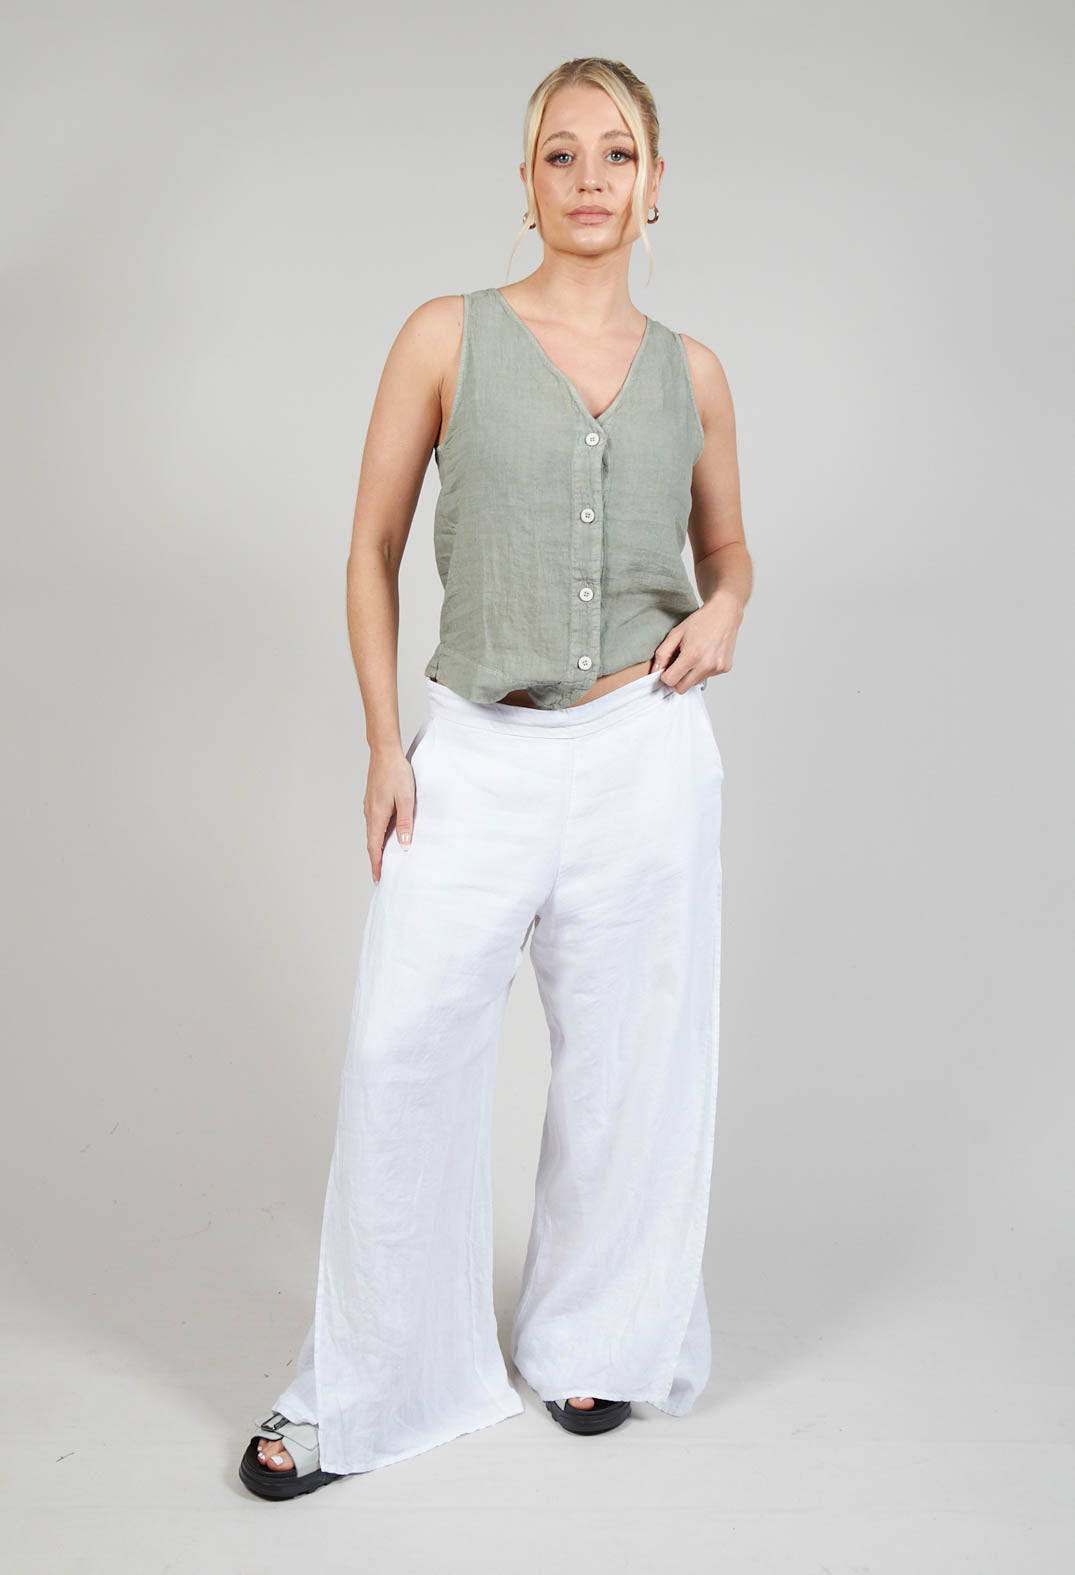 Lubao Pants in White